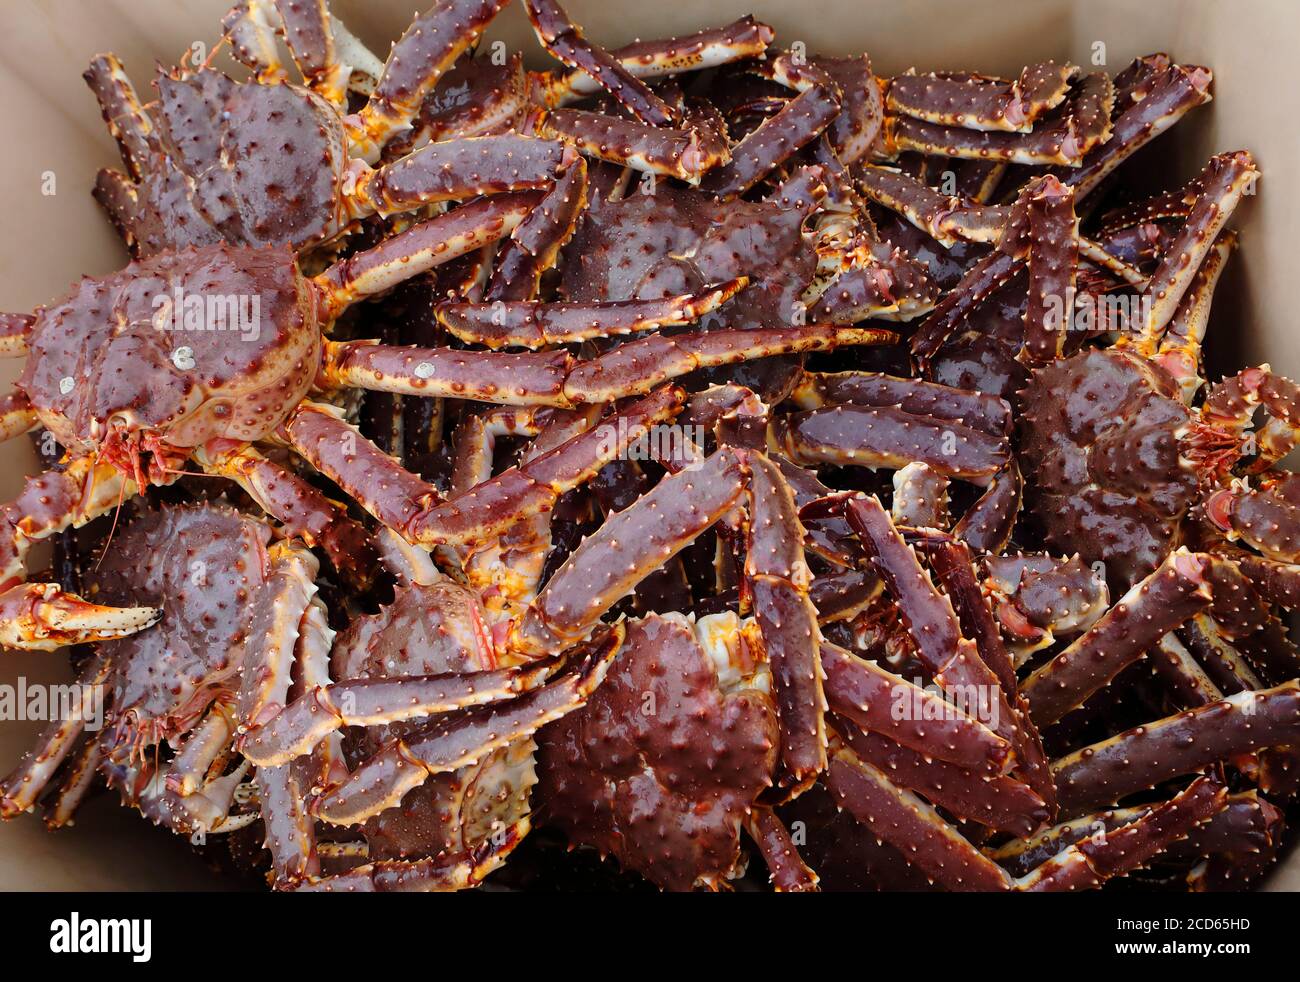 Red king giant crabs called as Kamchatka crab just from water uploaded in container, seafood background Stock Photo